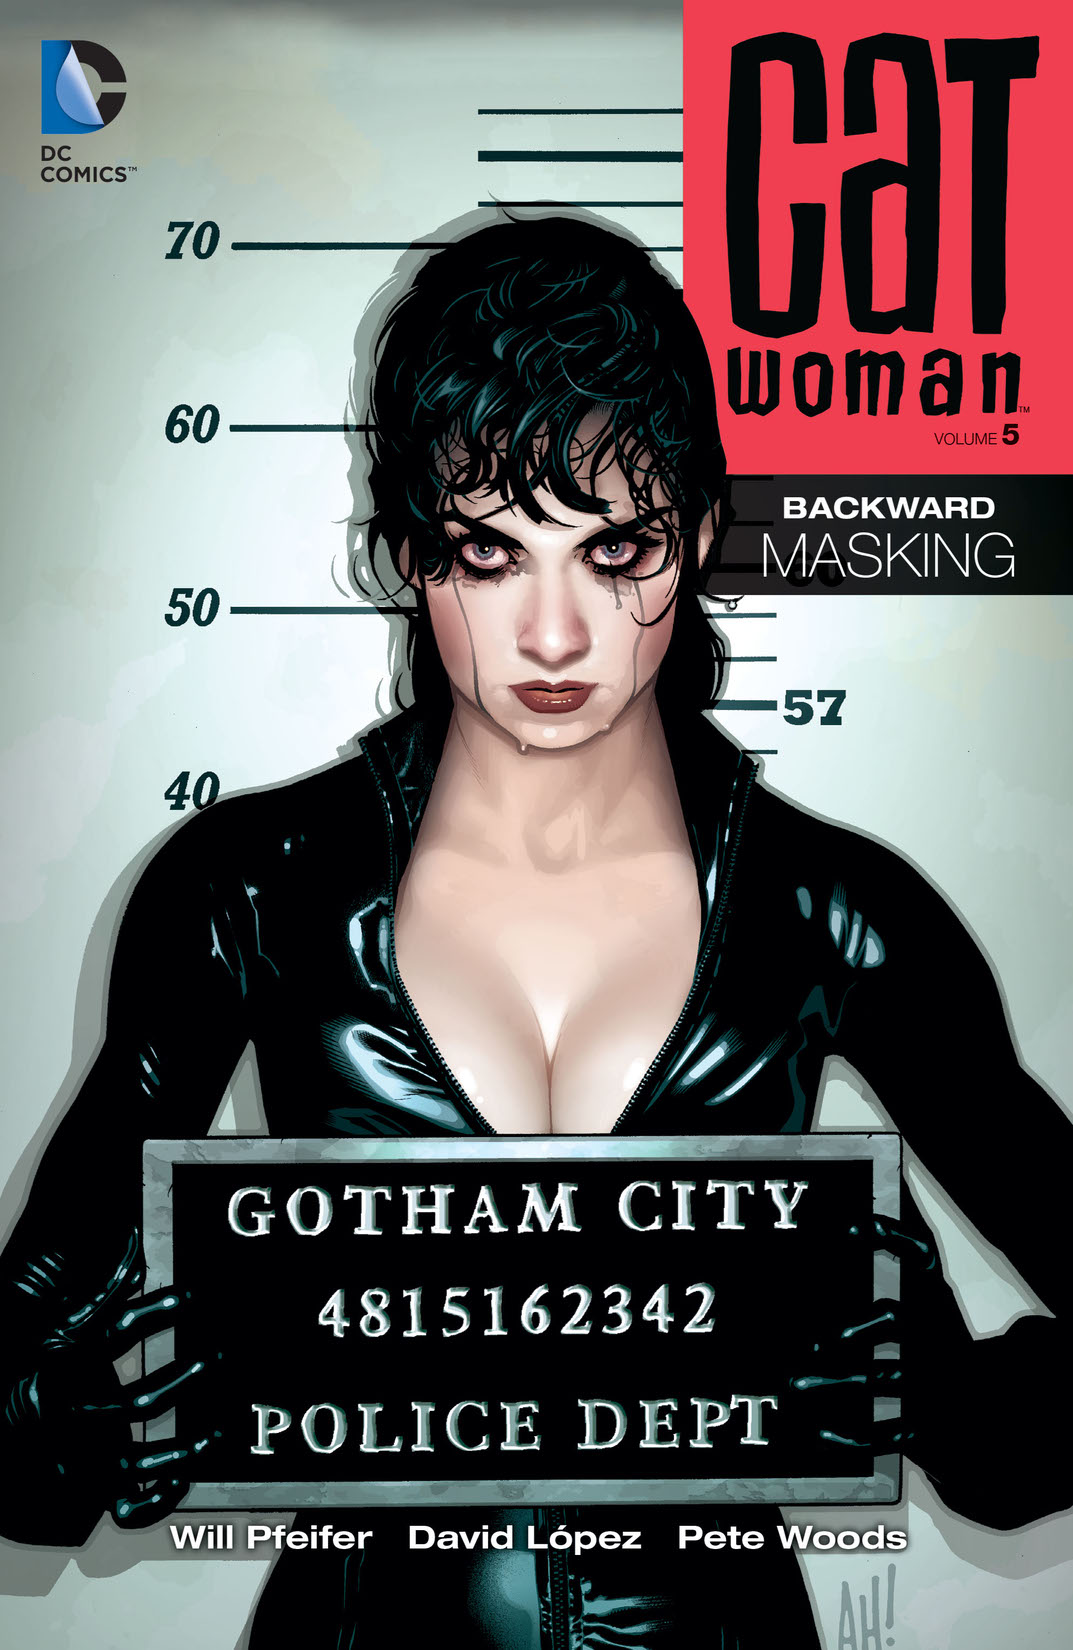 Catwoman Vol. 5: Backward Masking preview images